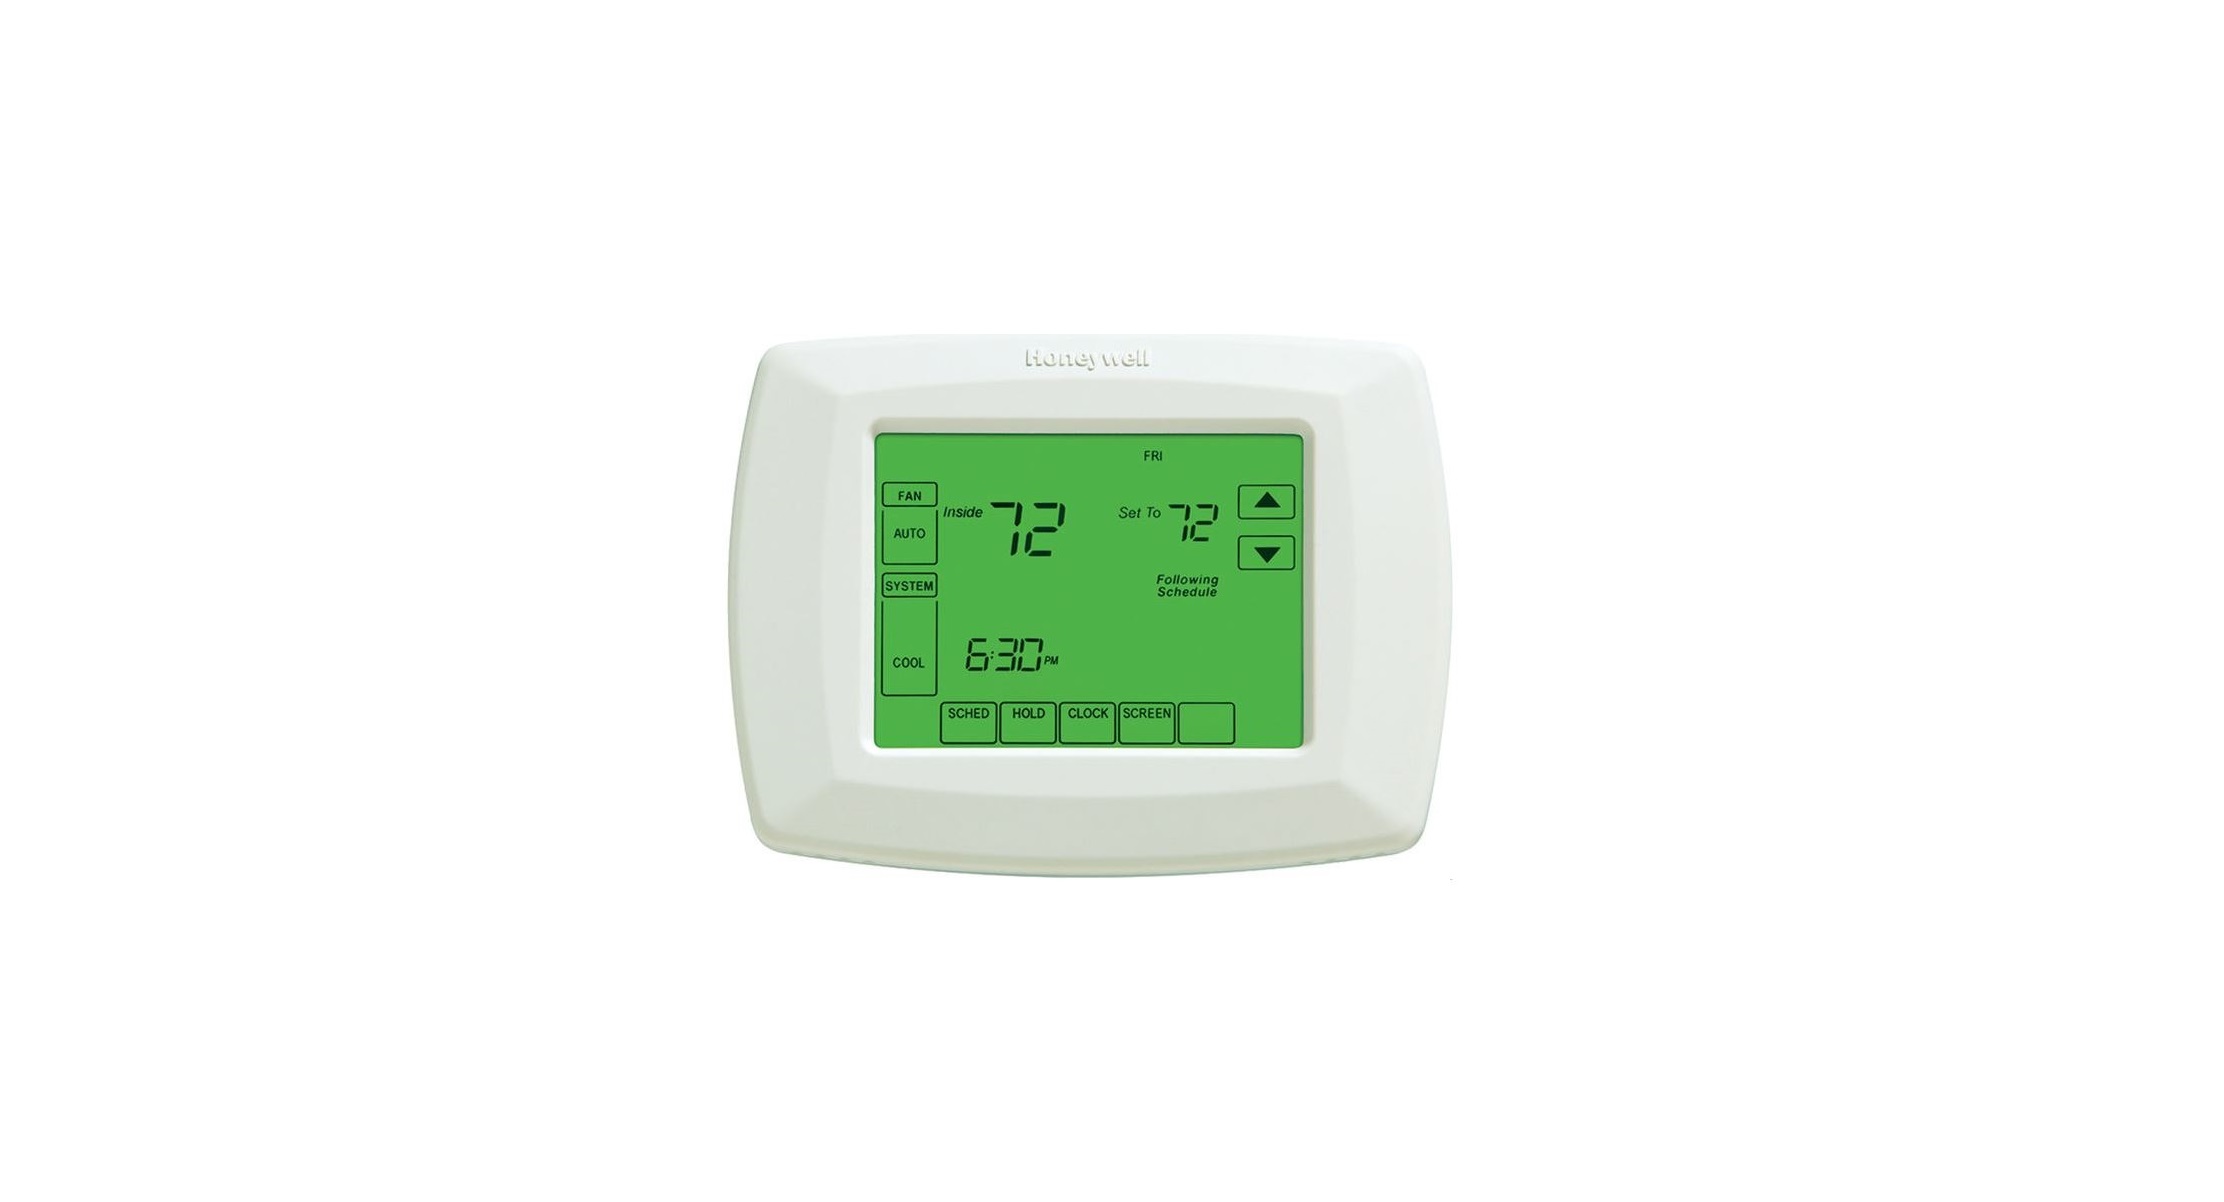 Honeywell RTH8580ZW Wi-Fi Touchscreen Programmable Thermostat Quick Start Guide